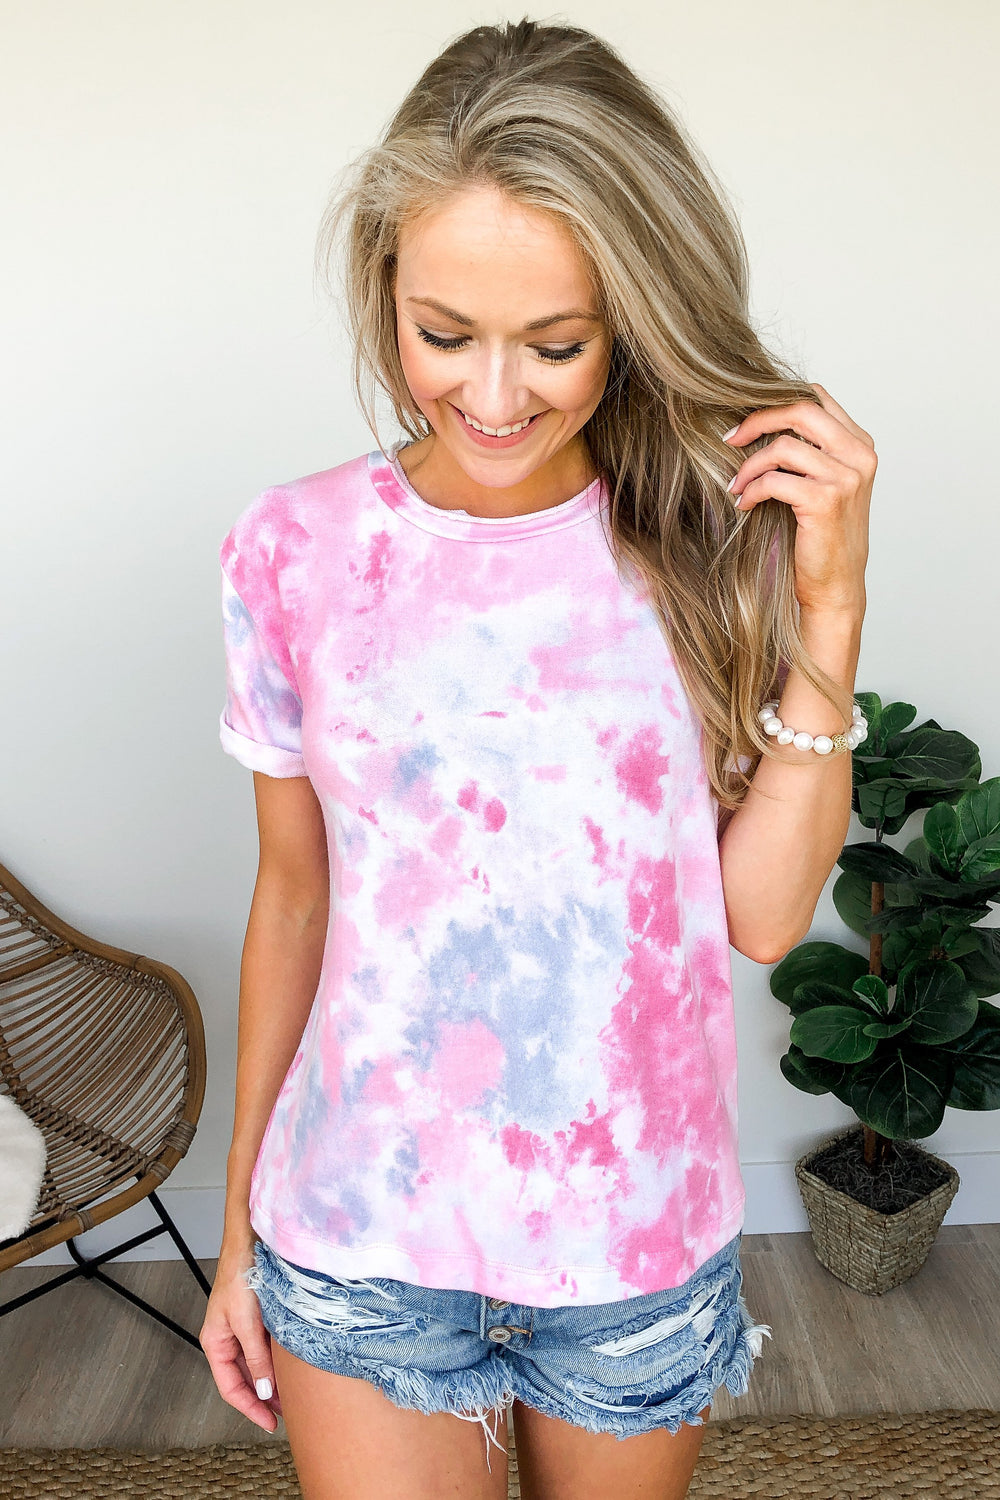 Just My Type Pink Tie Dye Top – The Pulse Boutique